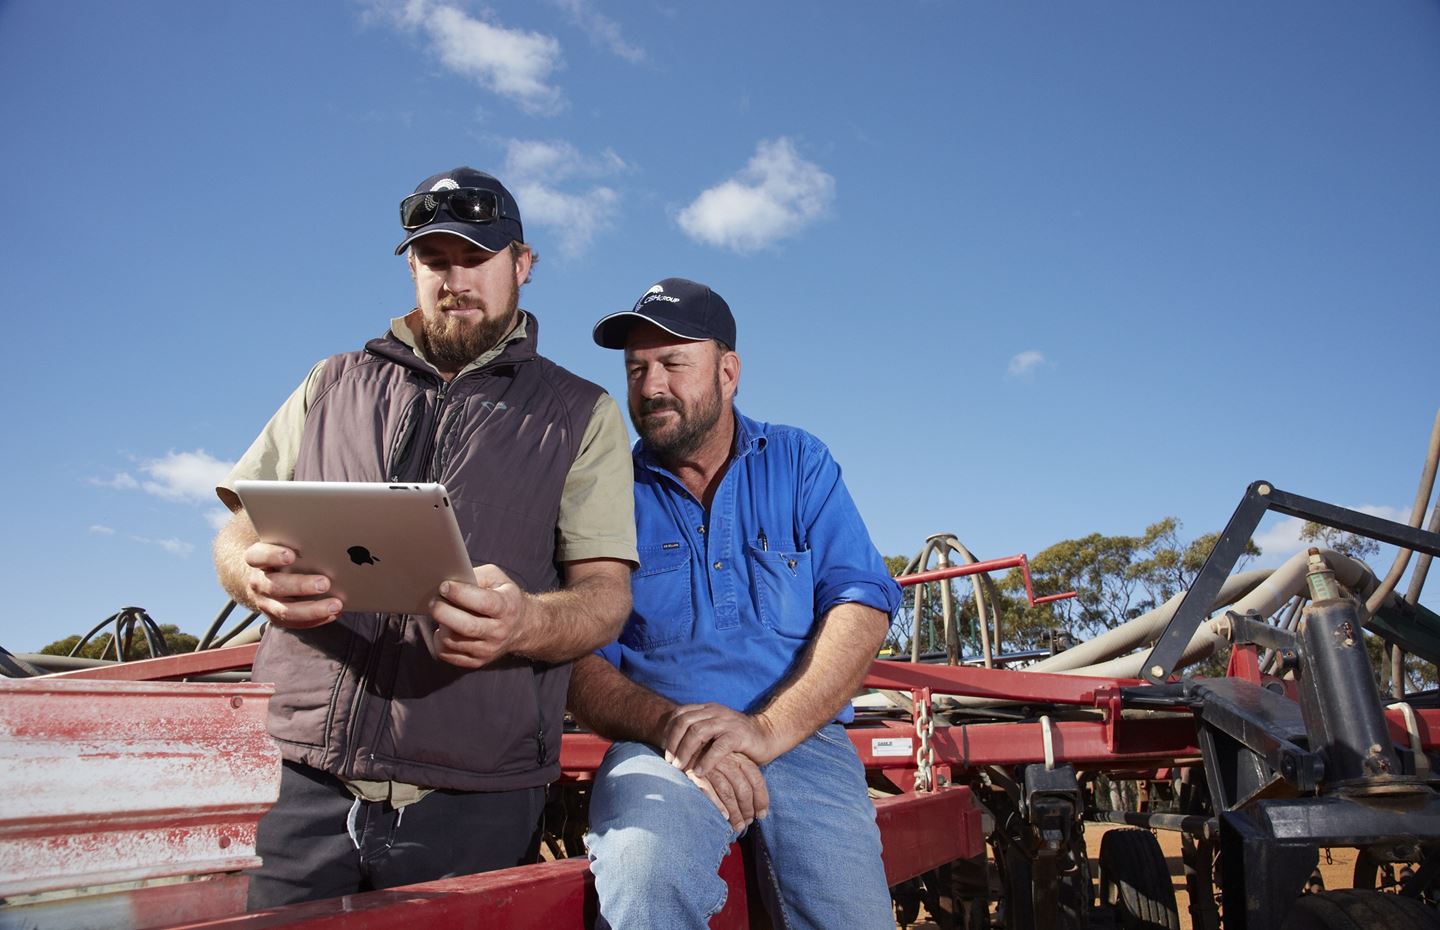 Two men wearing caps sit on a red tractor while looking at an ipad together